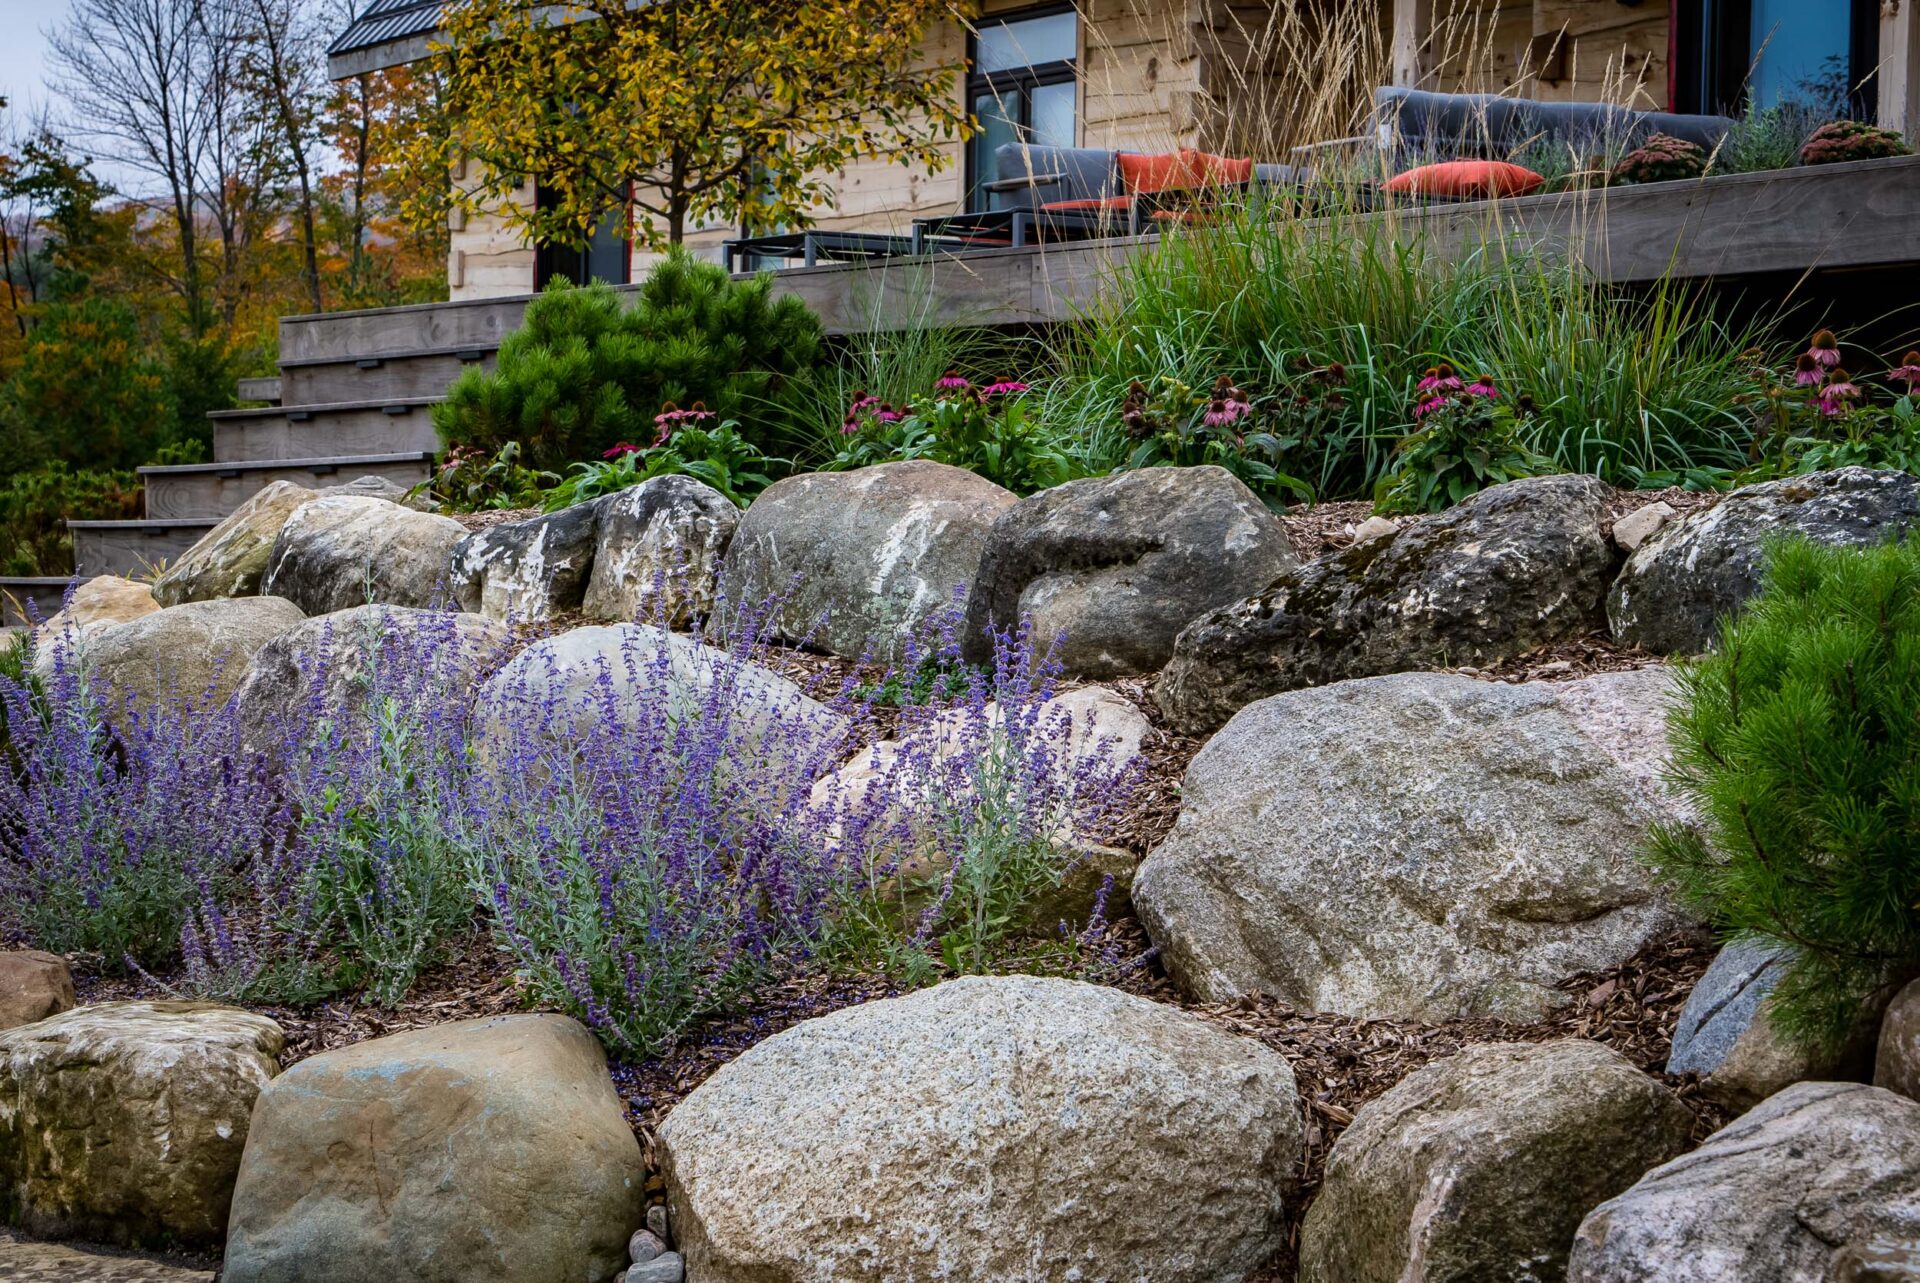 This image shows a landscaped garden with large rocks and blooming purple flowers in the foreground, and grasses and a building in the background.